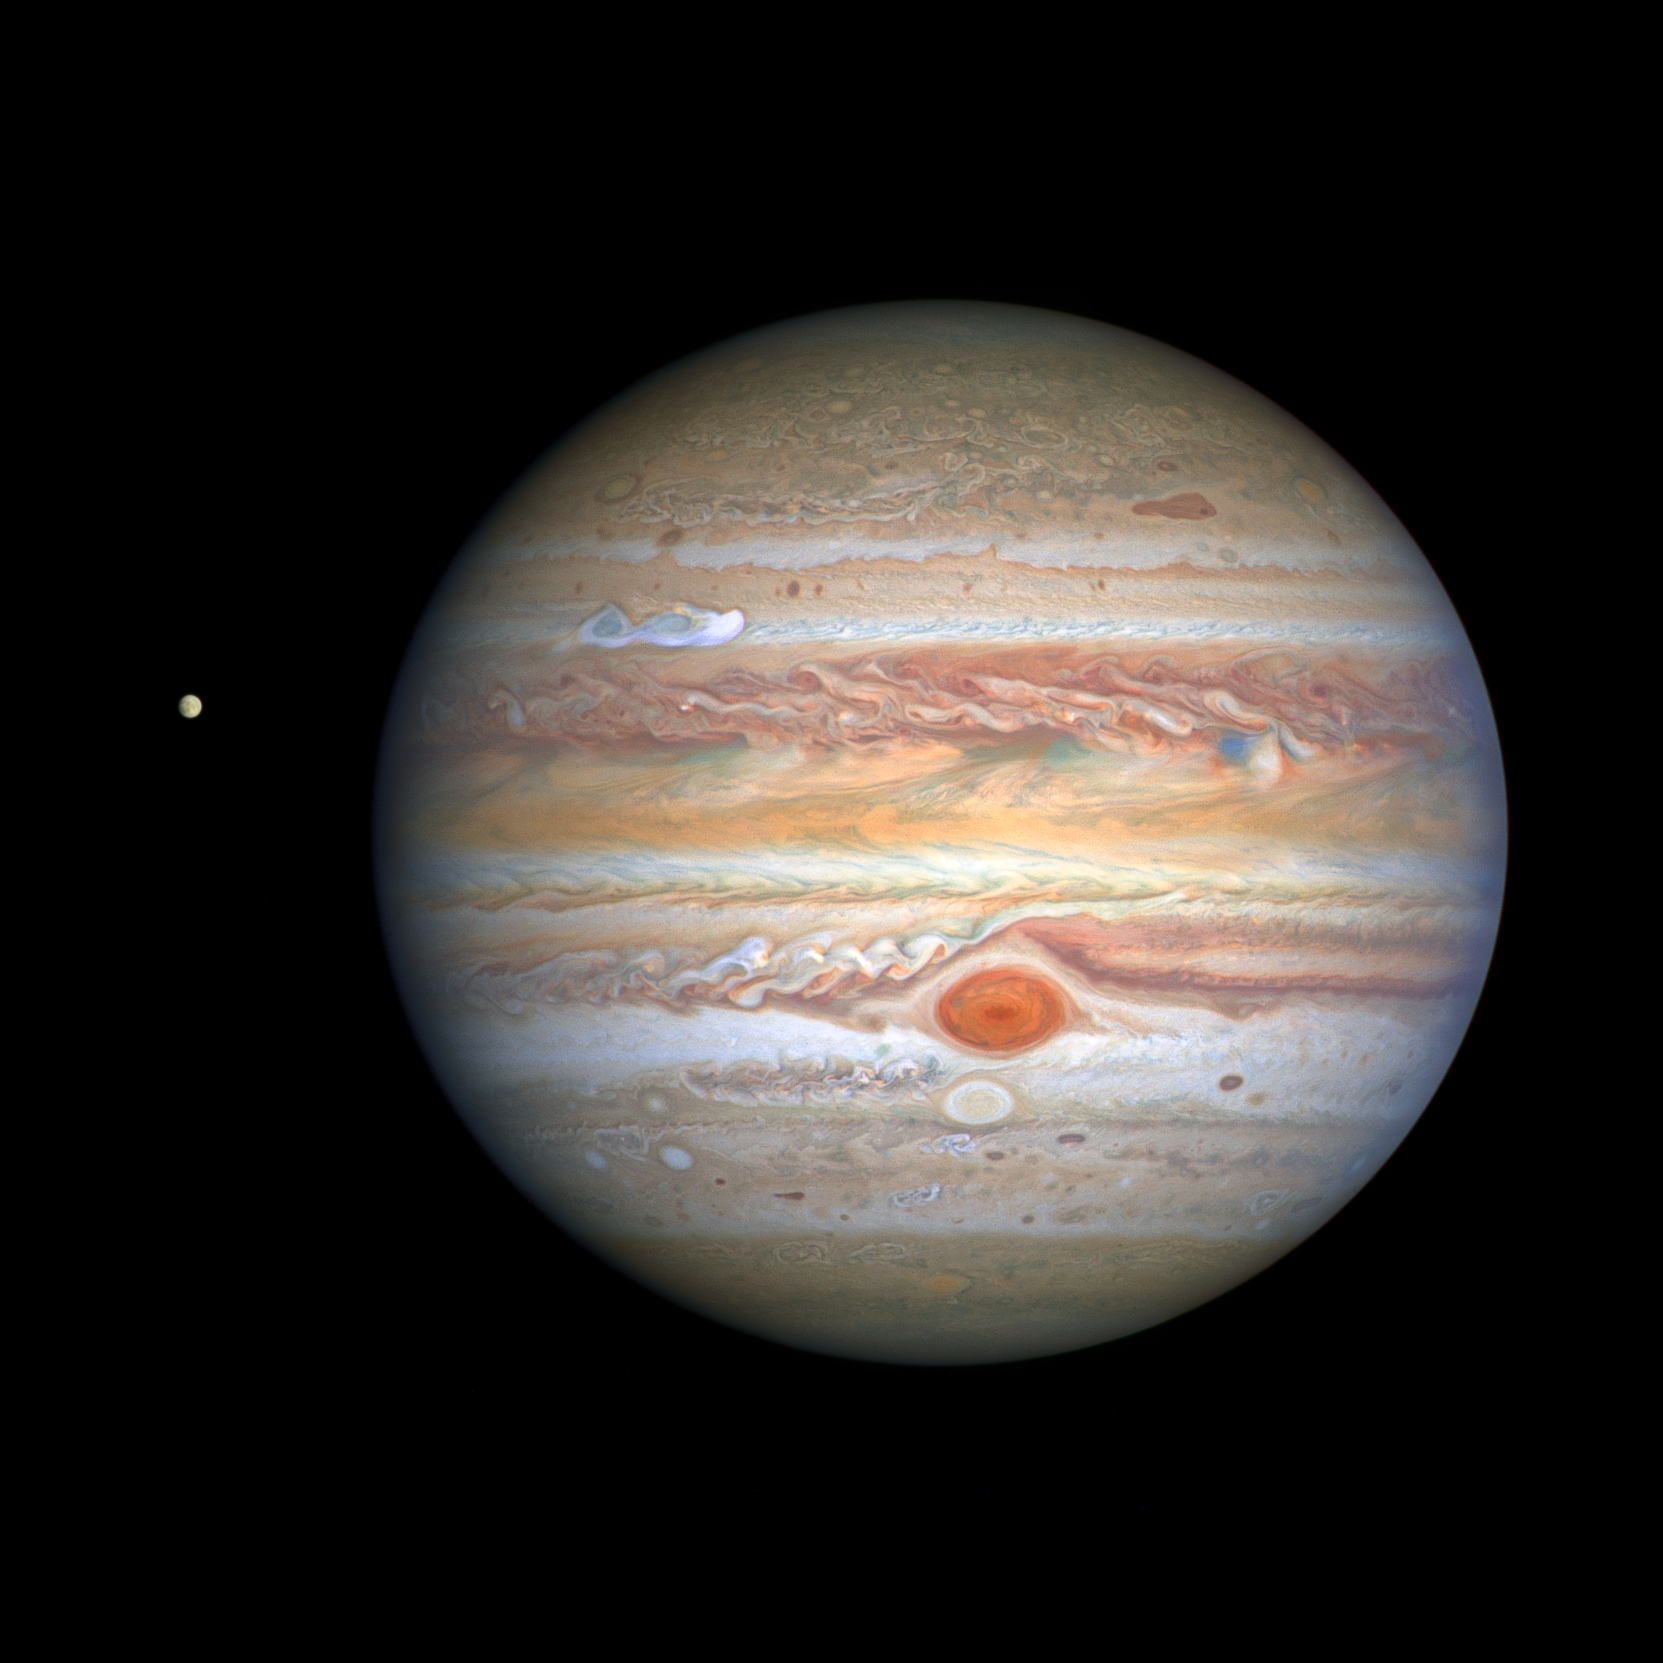 In 2022, ESA will launch a spacecraft called JUICE to explore Jupiter’s moons, including Europa (left). Image credit - NASA, ESA, STScI, A. Simon (Goddard Space Flight Center), and M.H. Wong (University of California, Berkeley) and the OPAL team